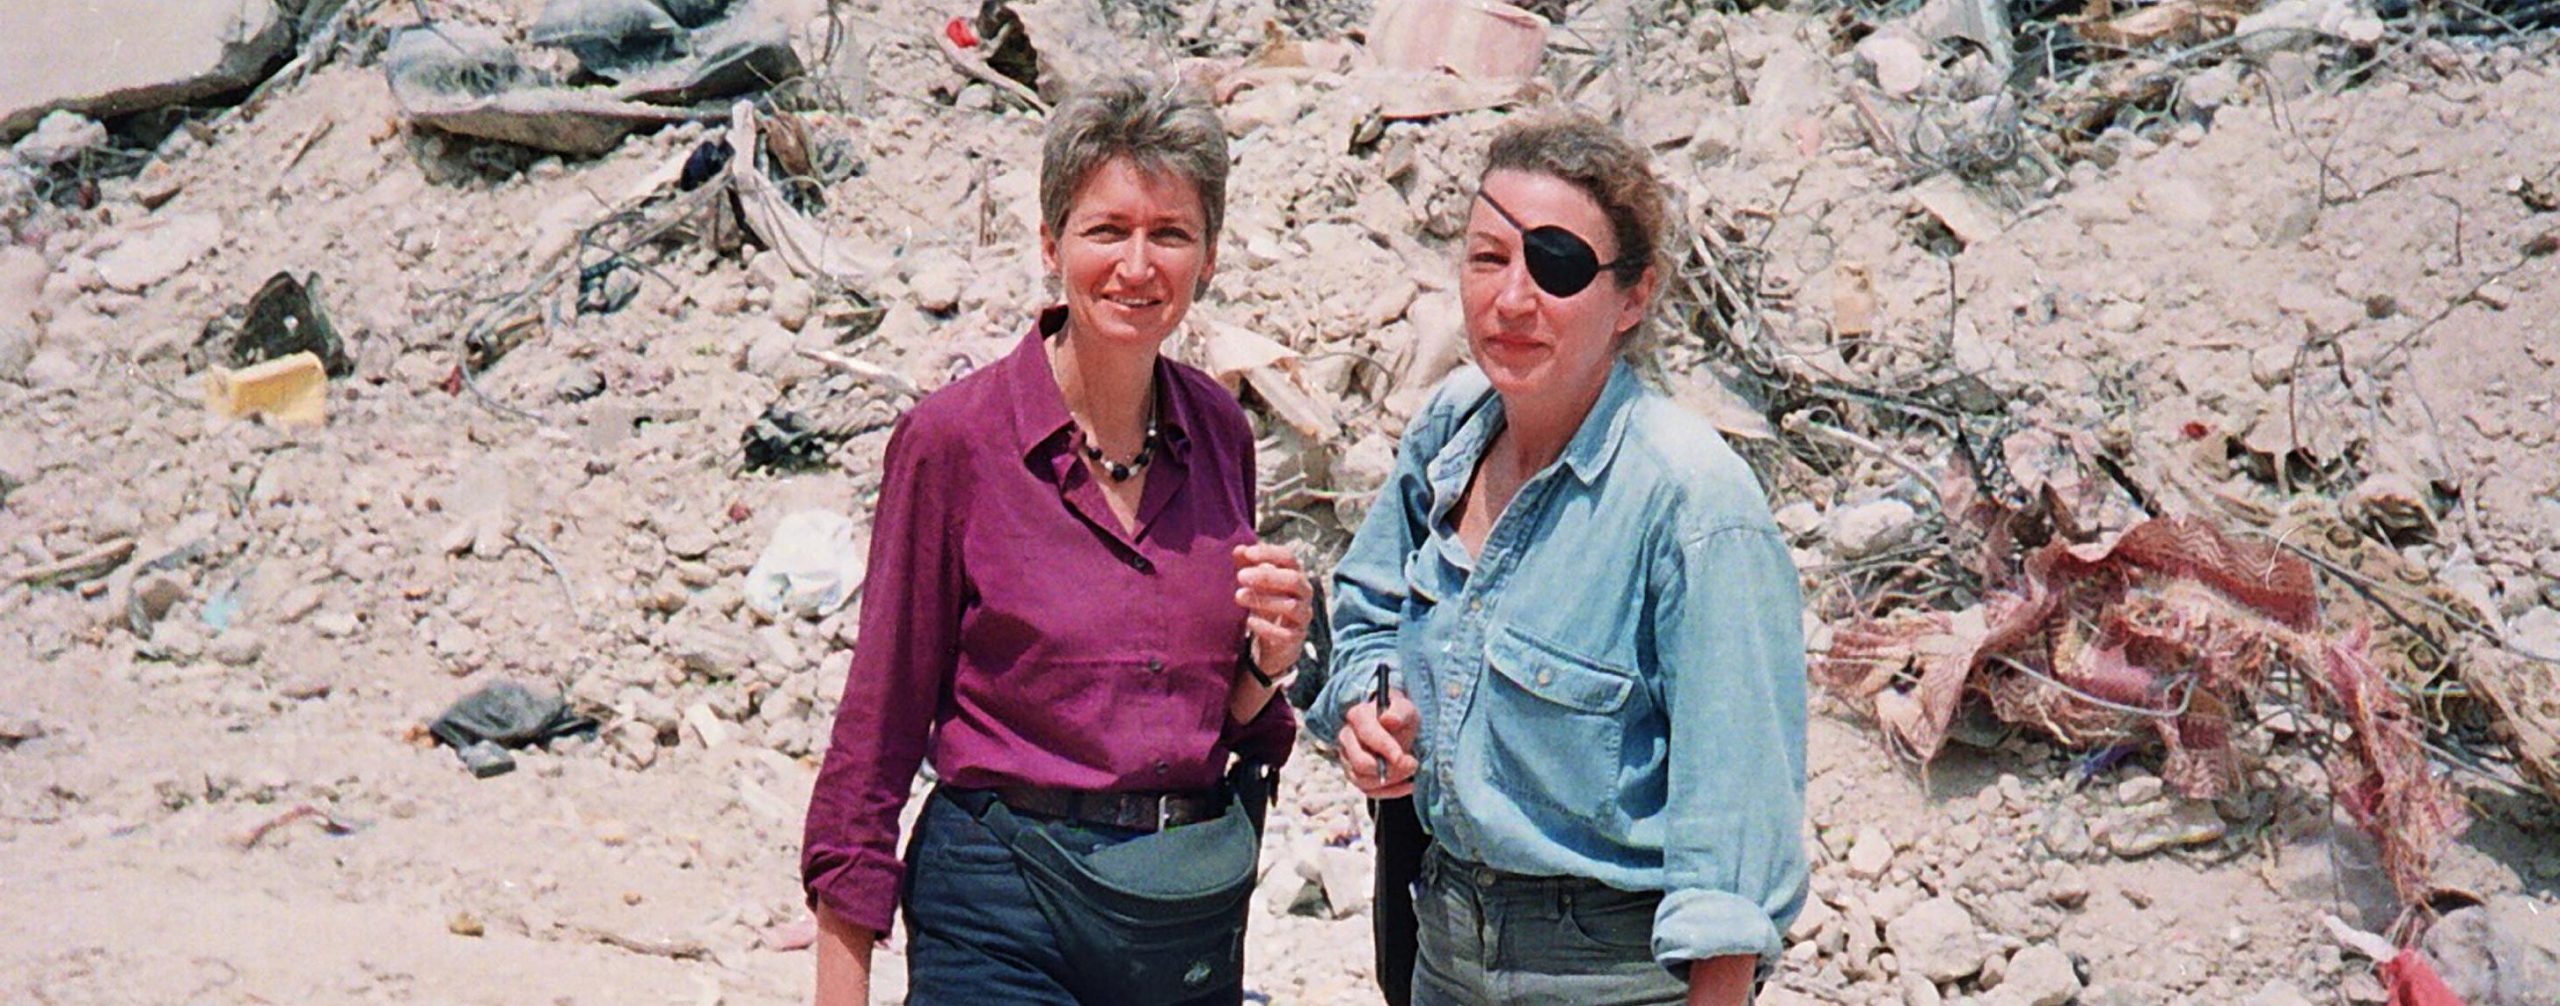 "I wanted her to be remembered for her life" - Lindsey Hilsum on Marie Colvin